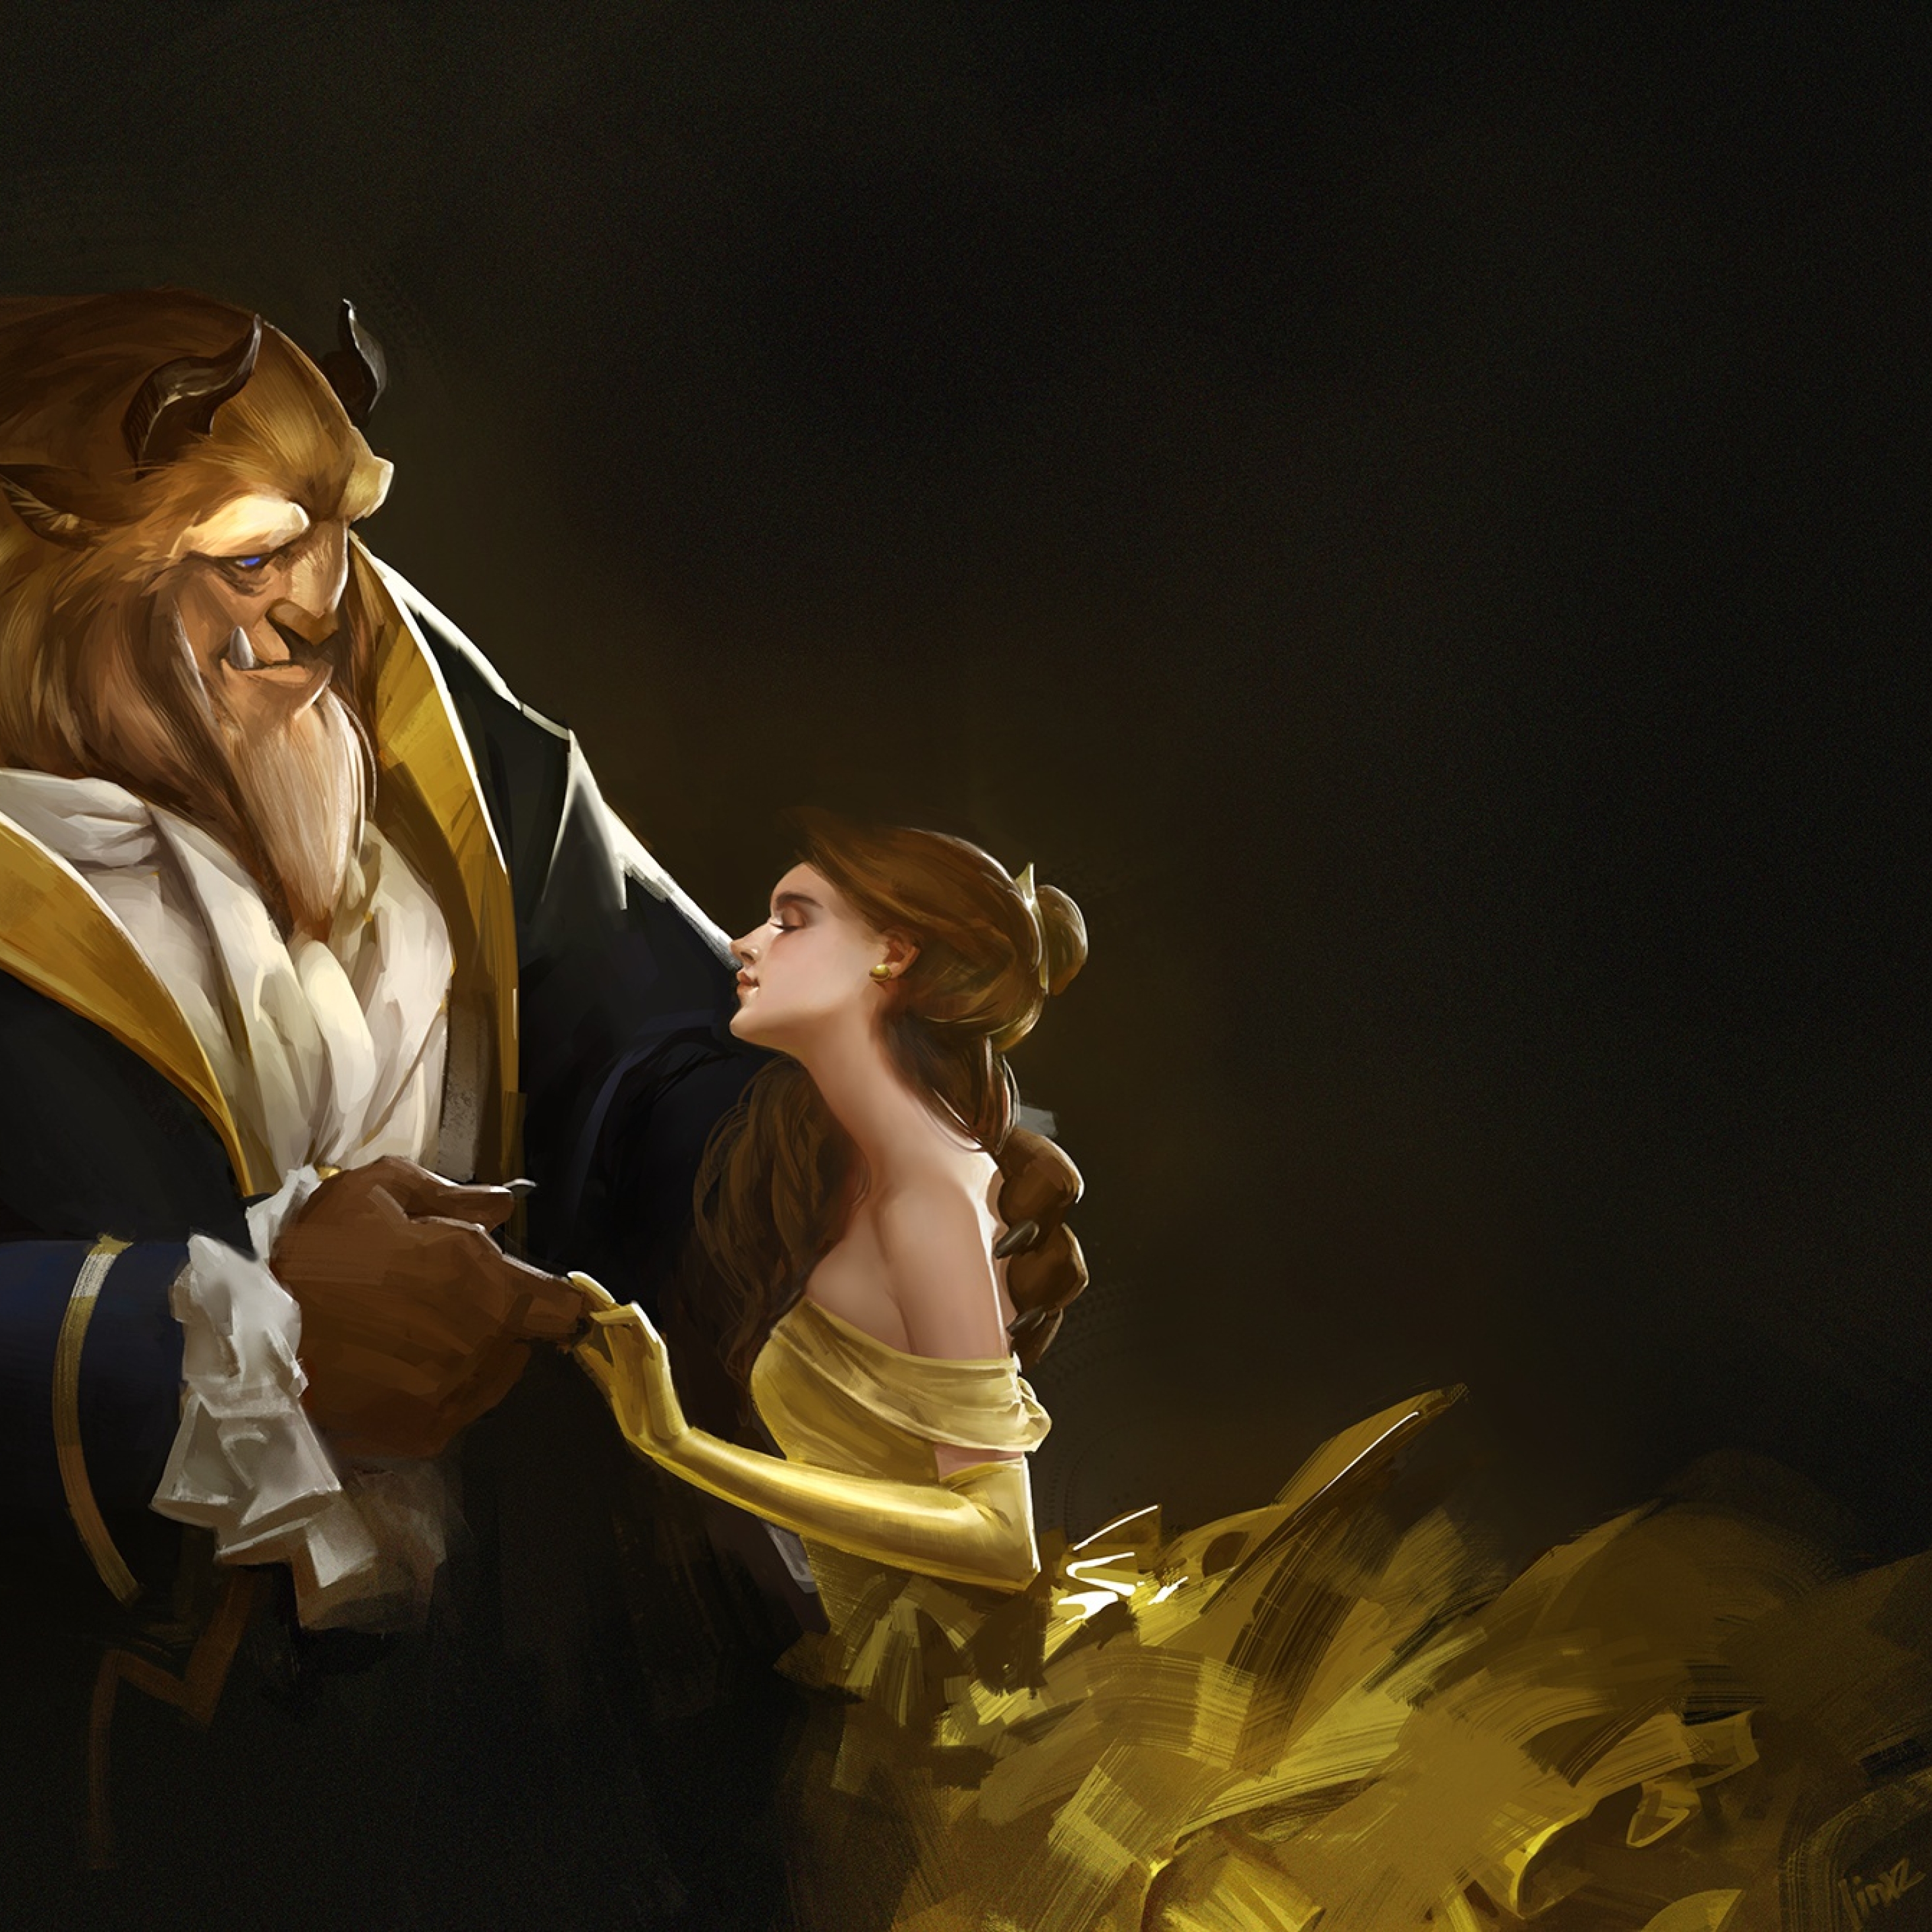 Beauty And The Beast Artwork (2932x2932) Resolution Wallpaper.